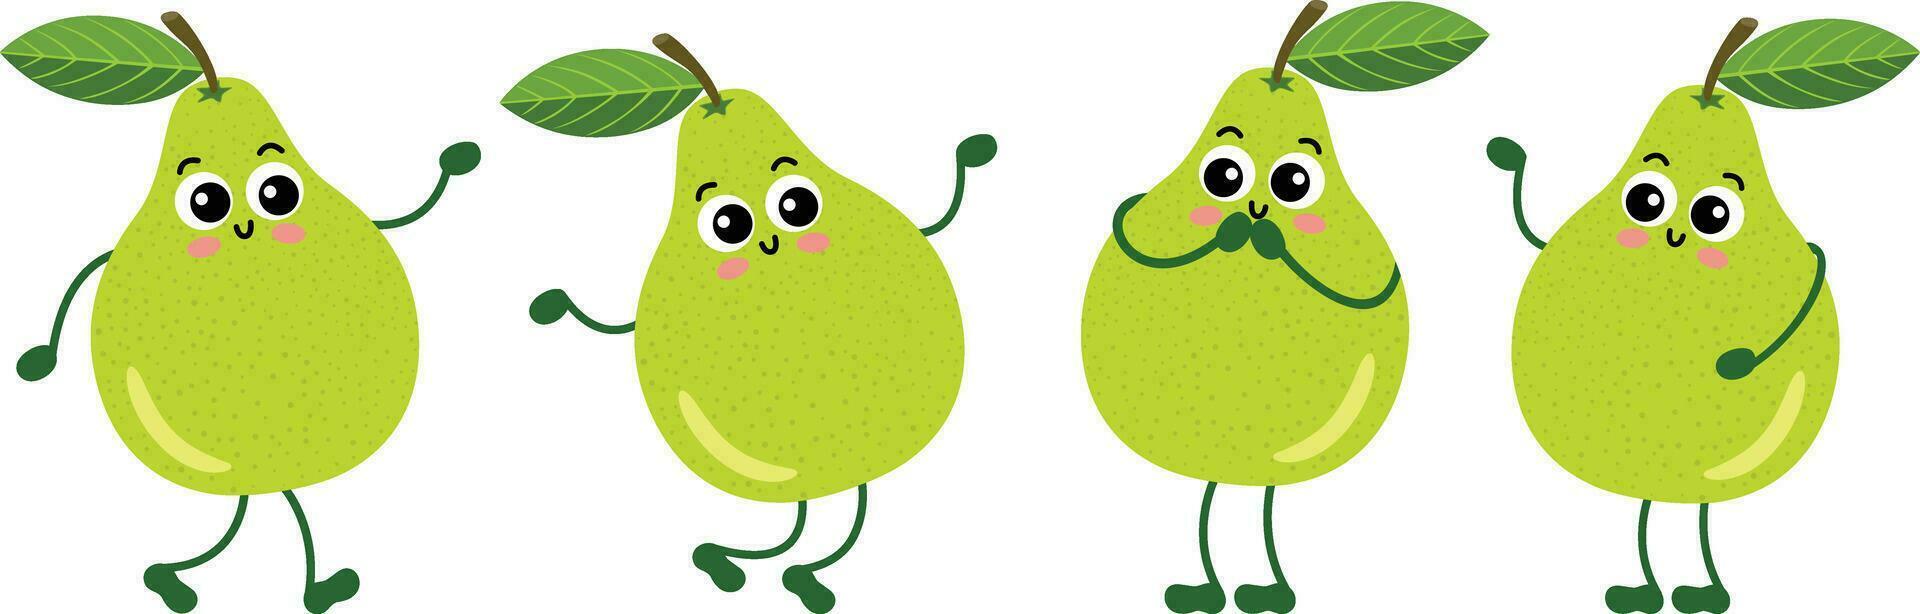 Set of funny green pear mascot in different positions vector